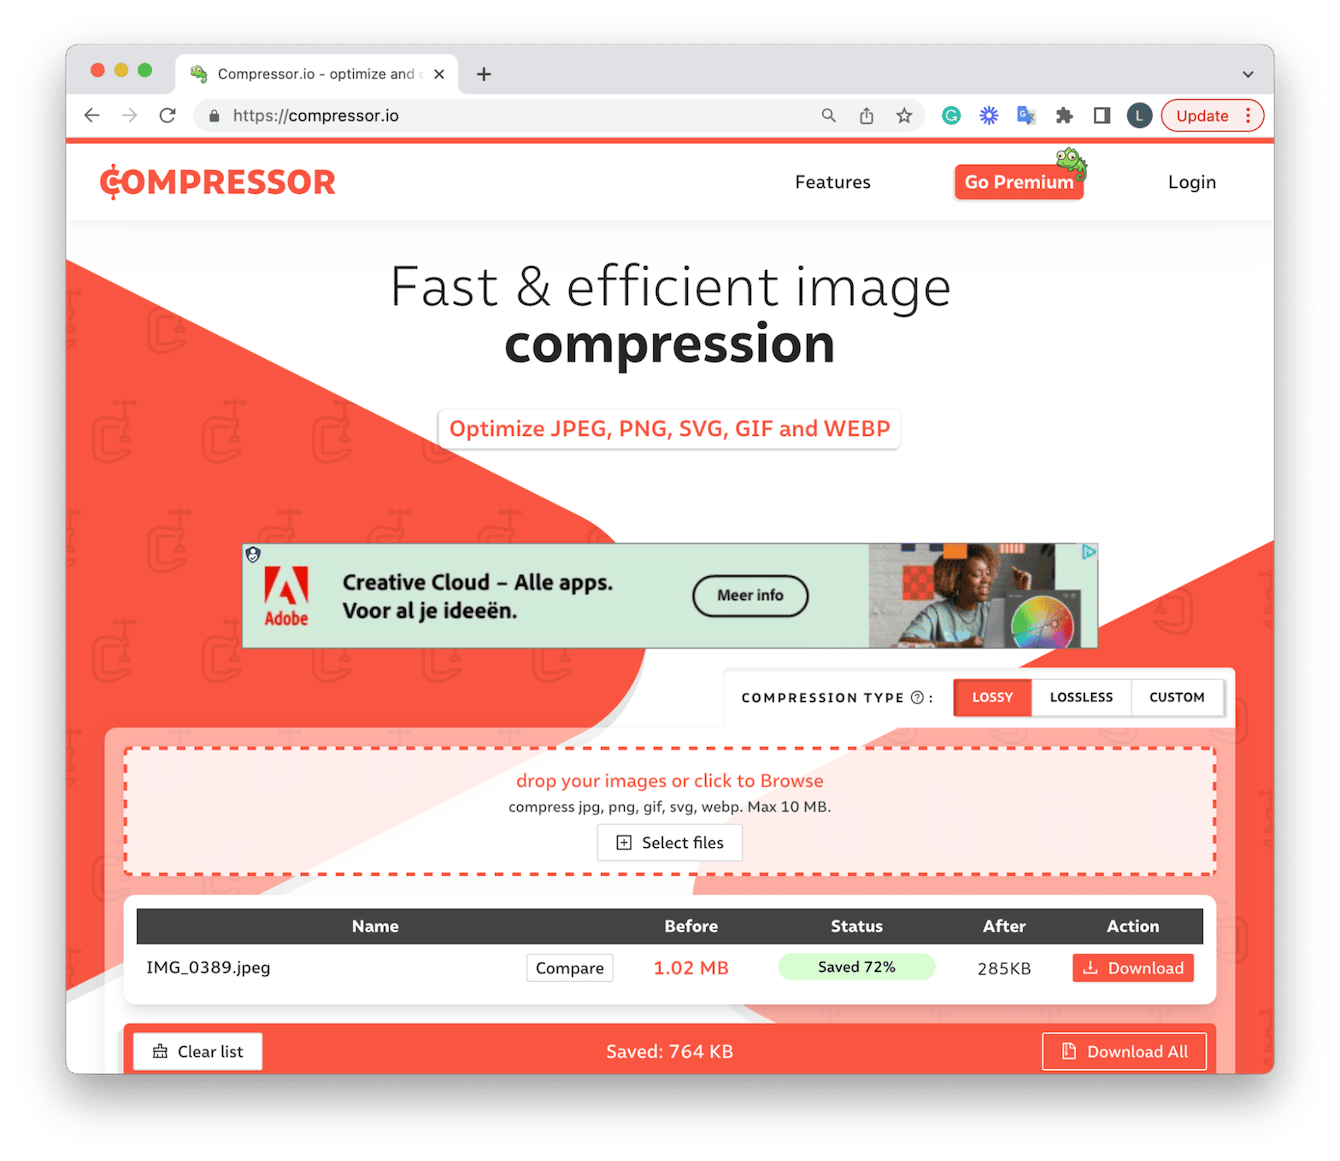 Compressor.io – great online tool for condensing the size of images